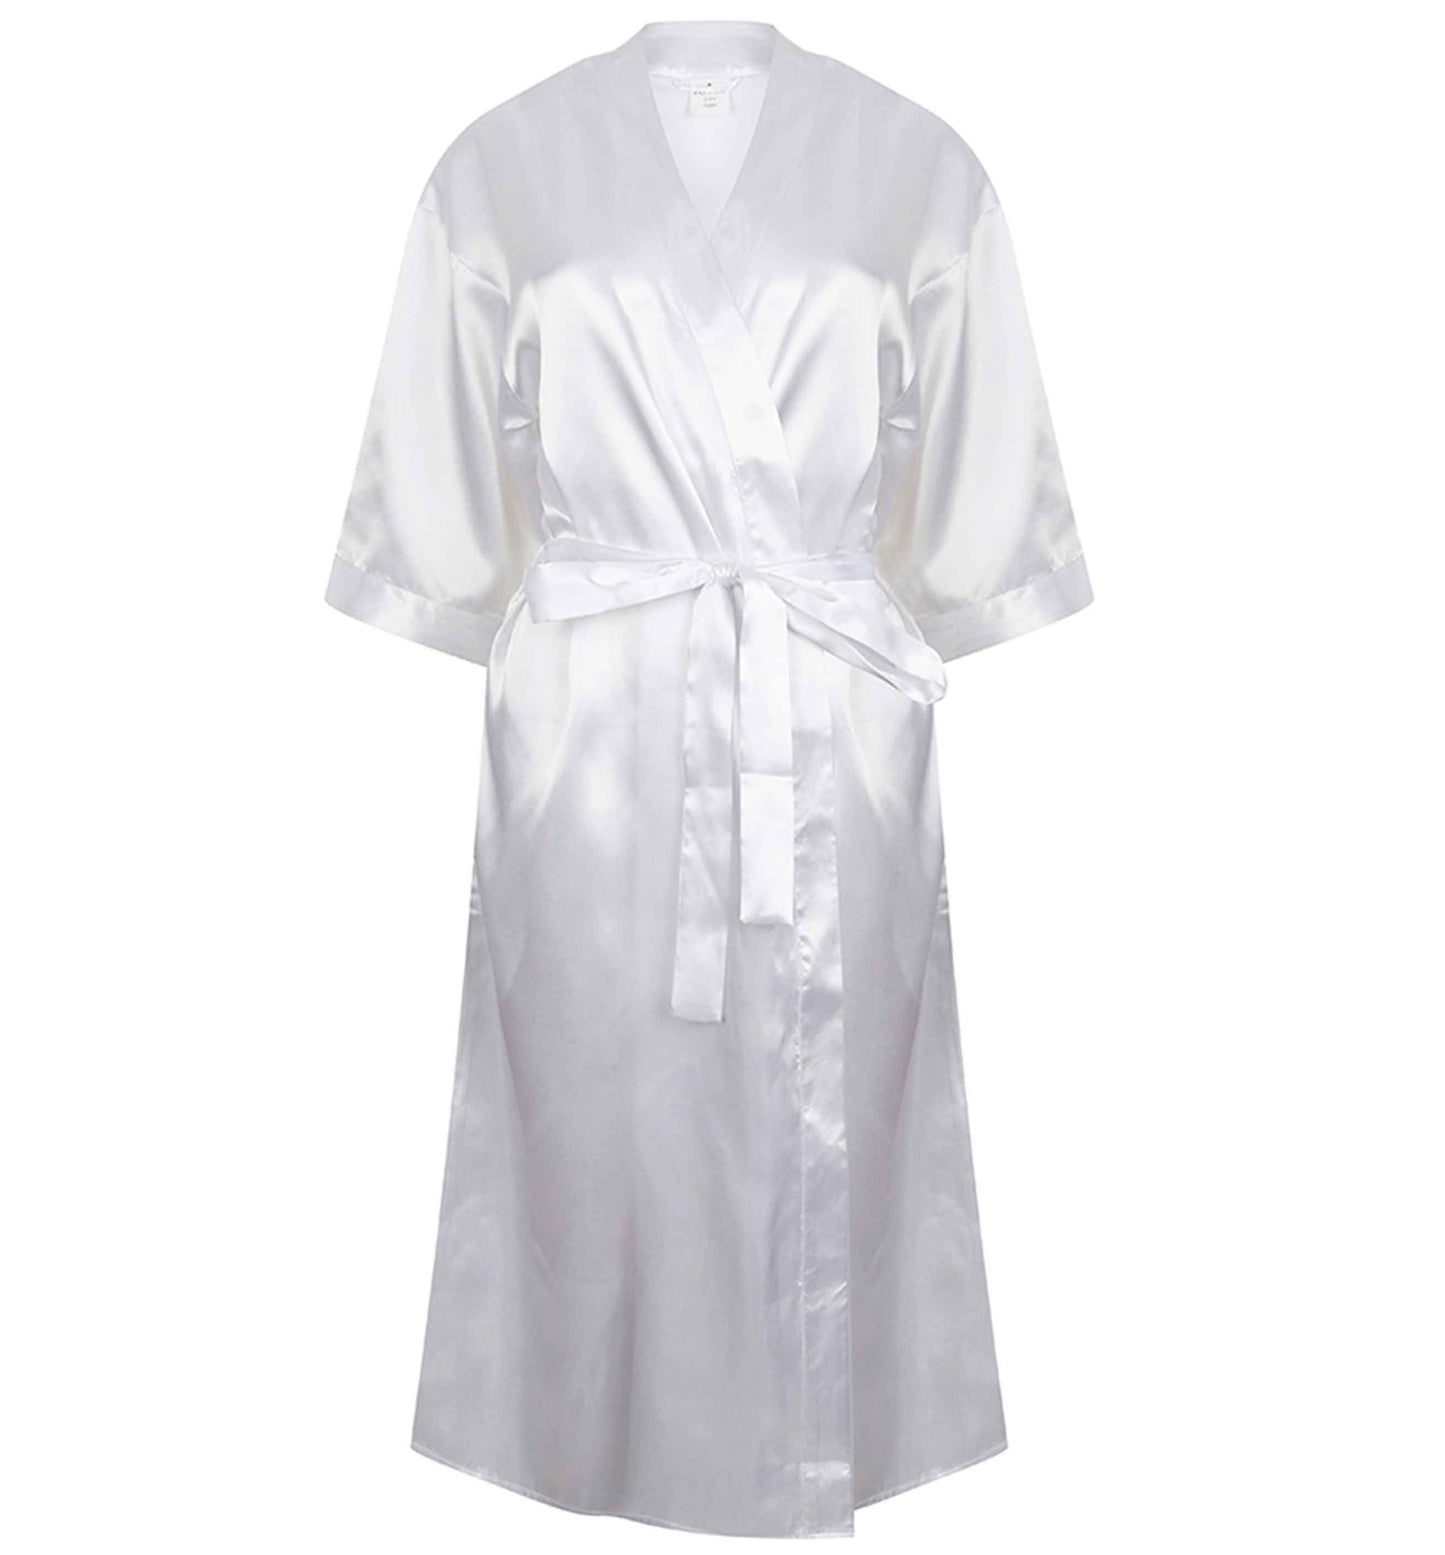 I can't keep calm it's my hen party | 8-18 | Kimono style satin robe | Ladies dressing gown